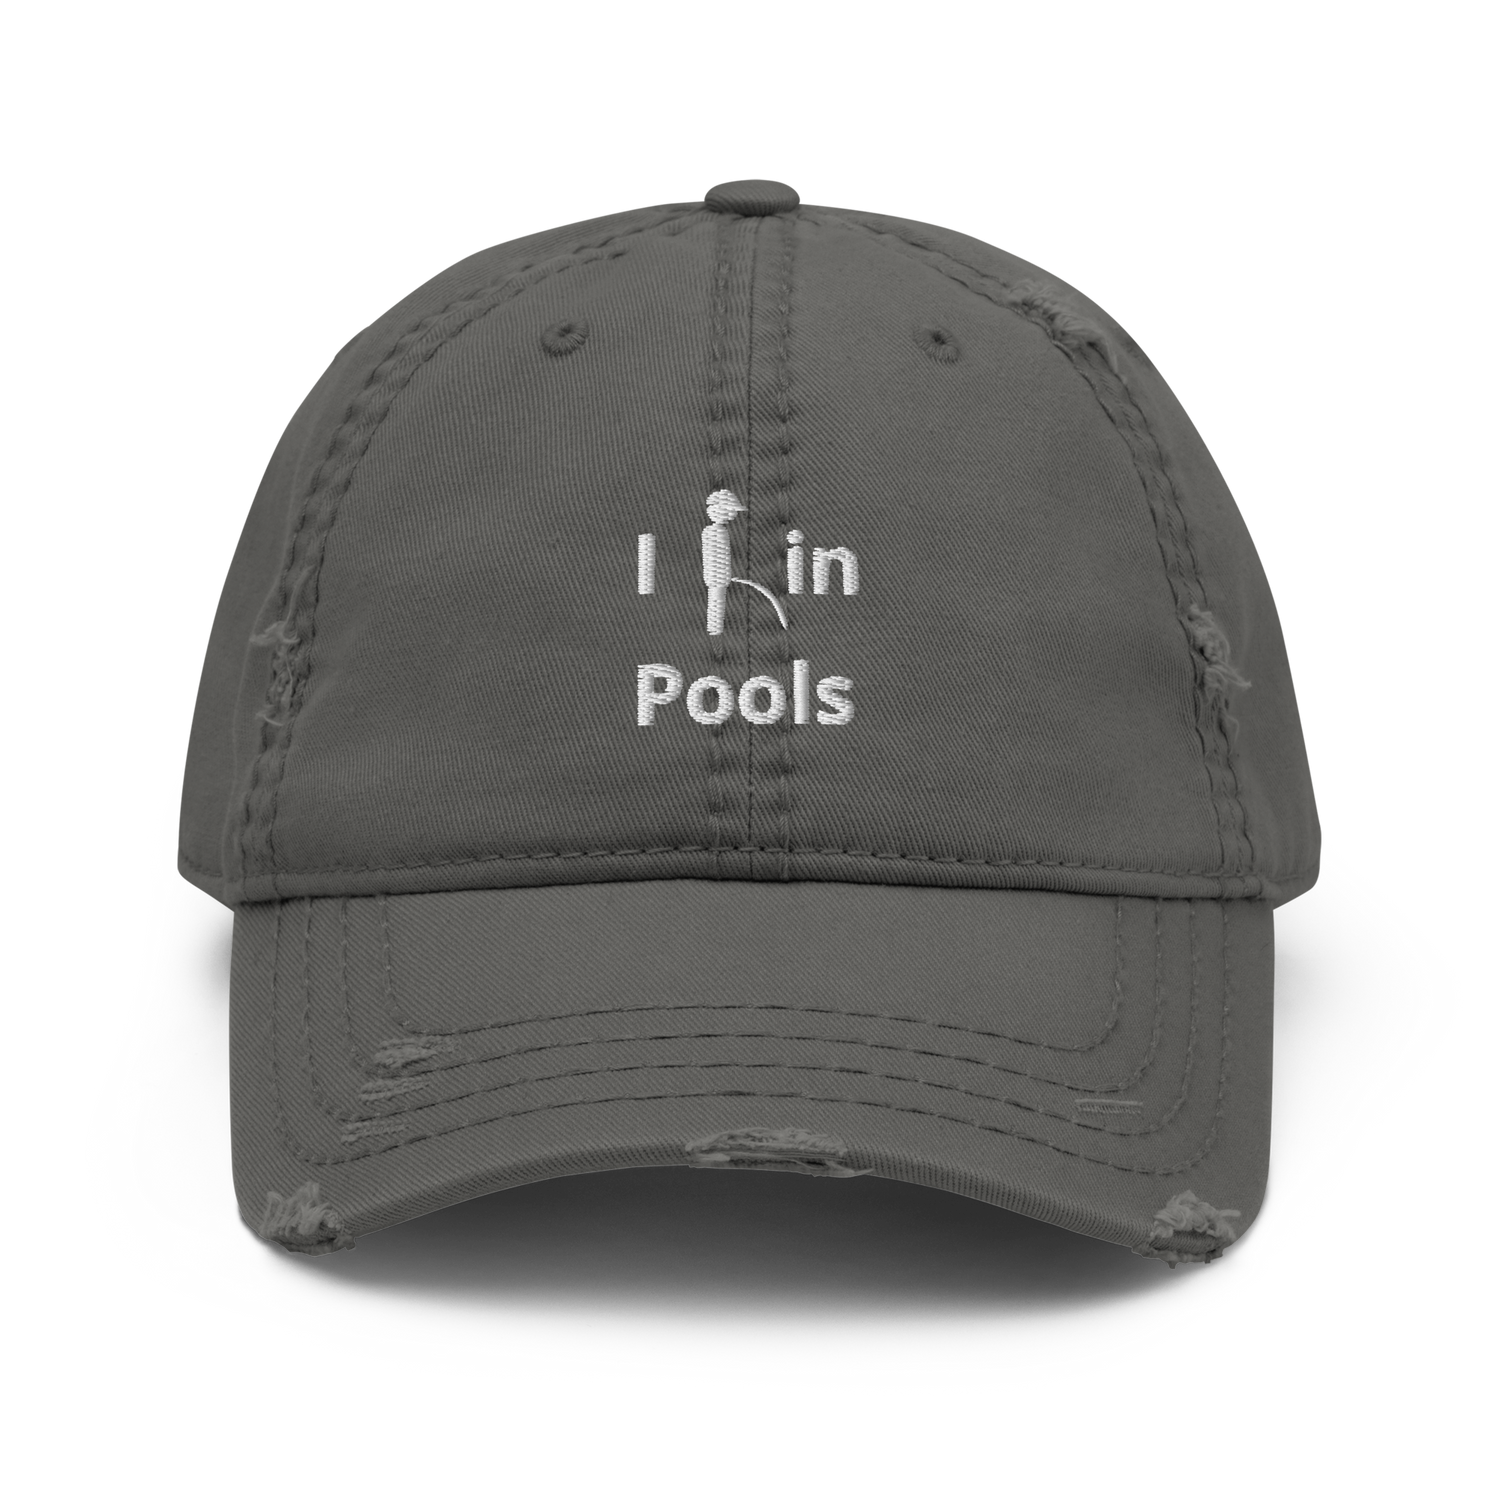 I Pee In Pools Distressed Dad Hat